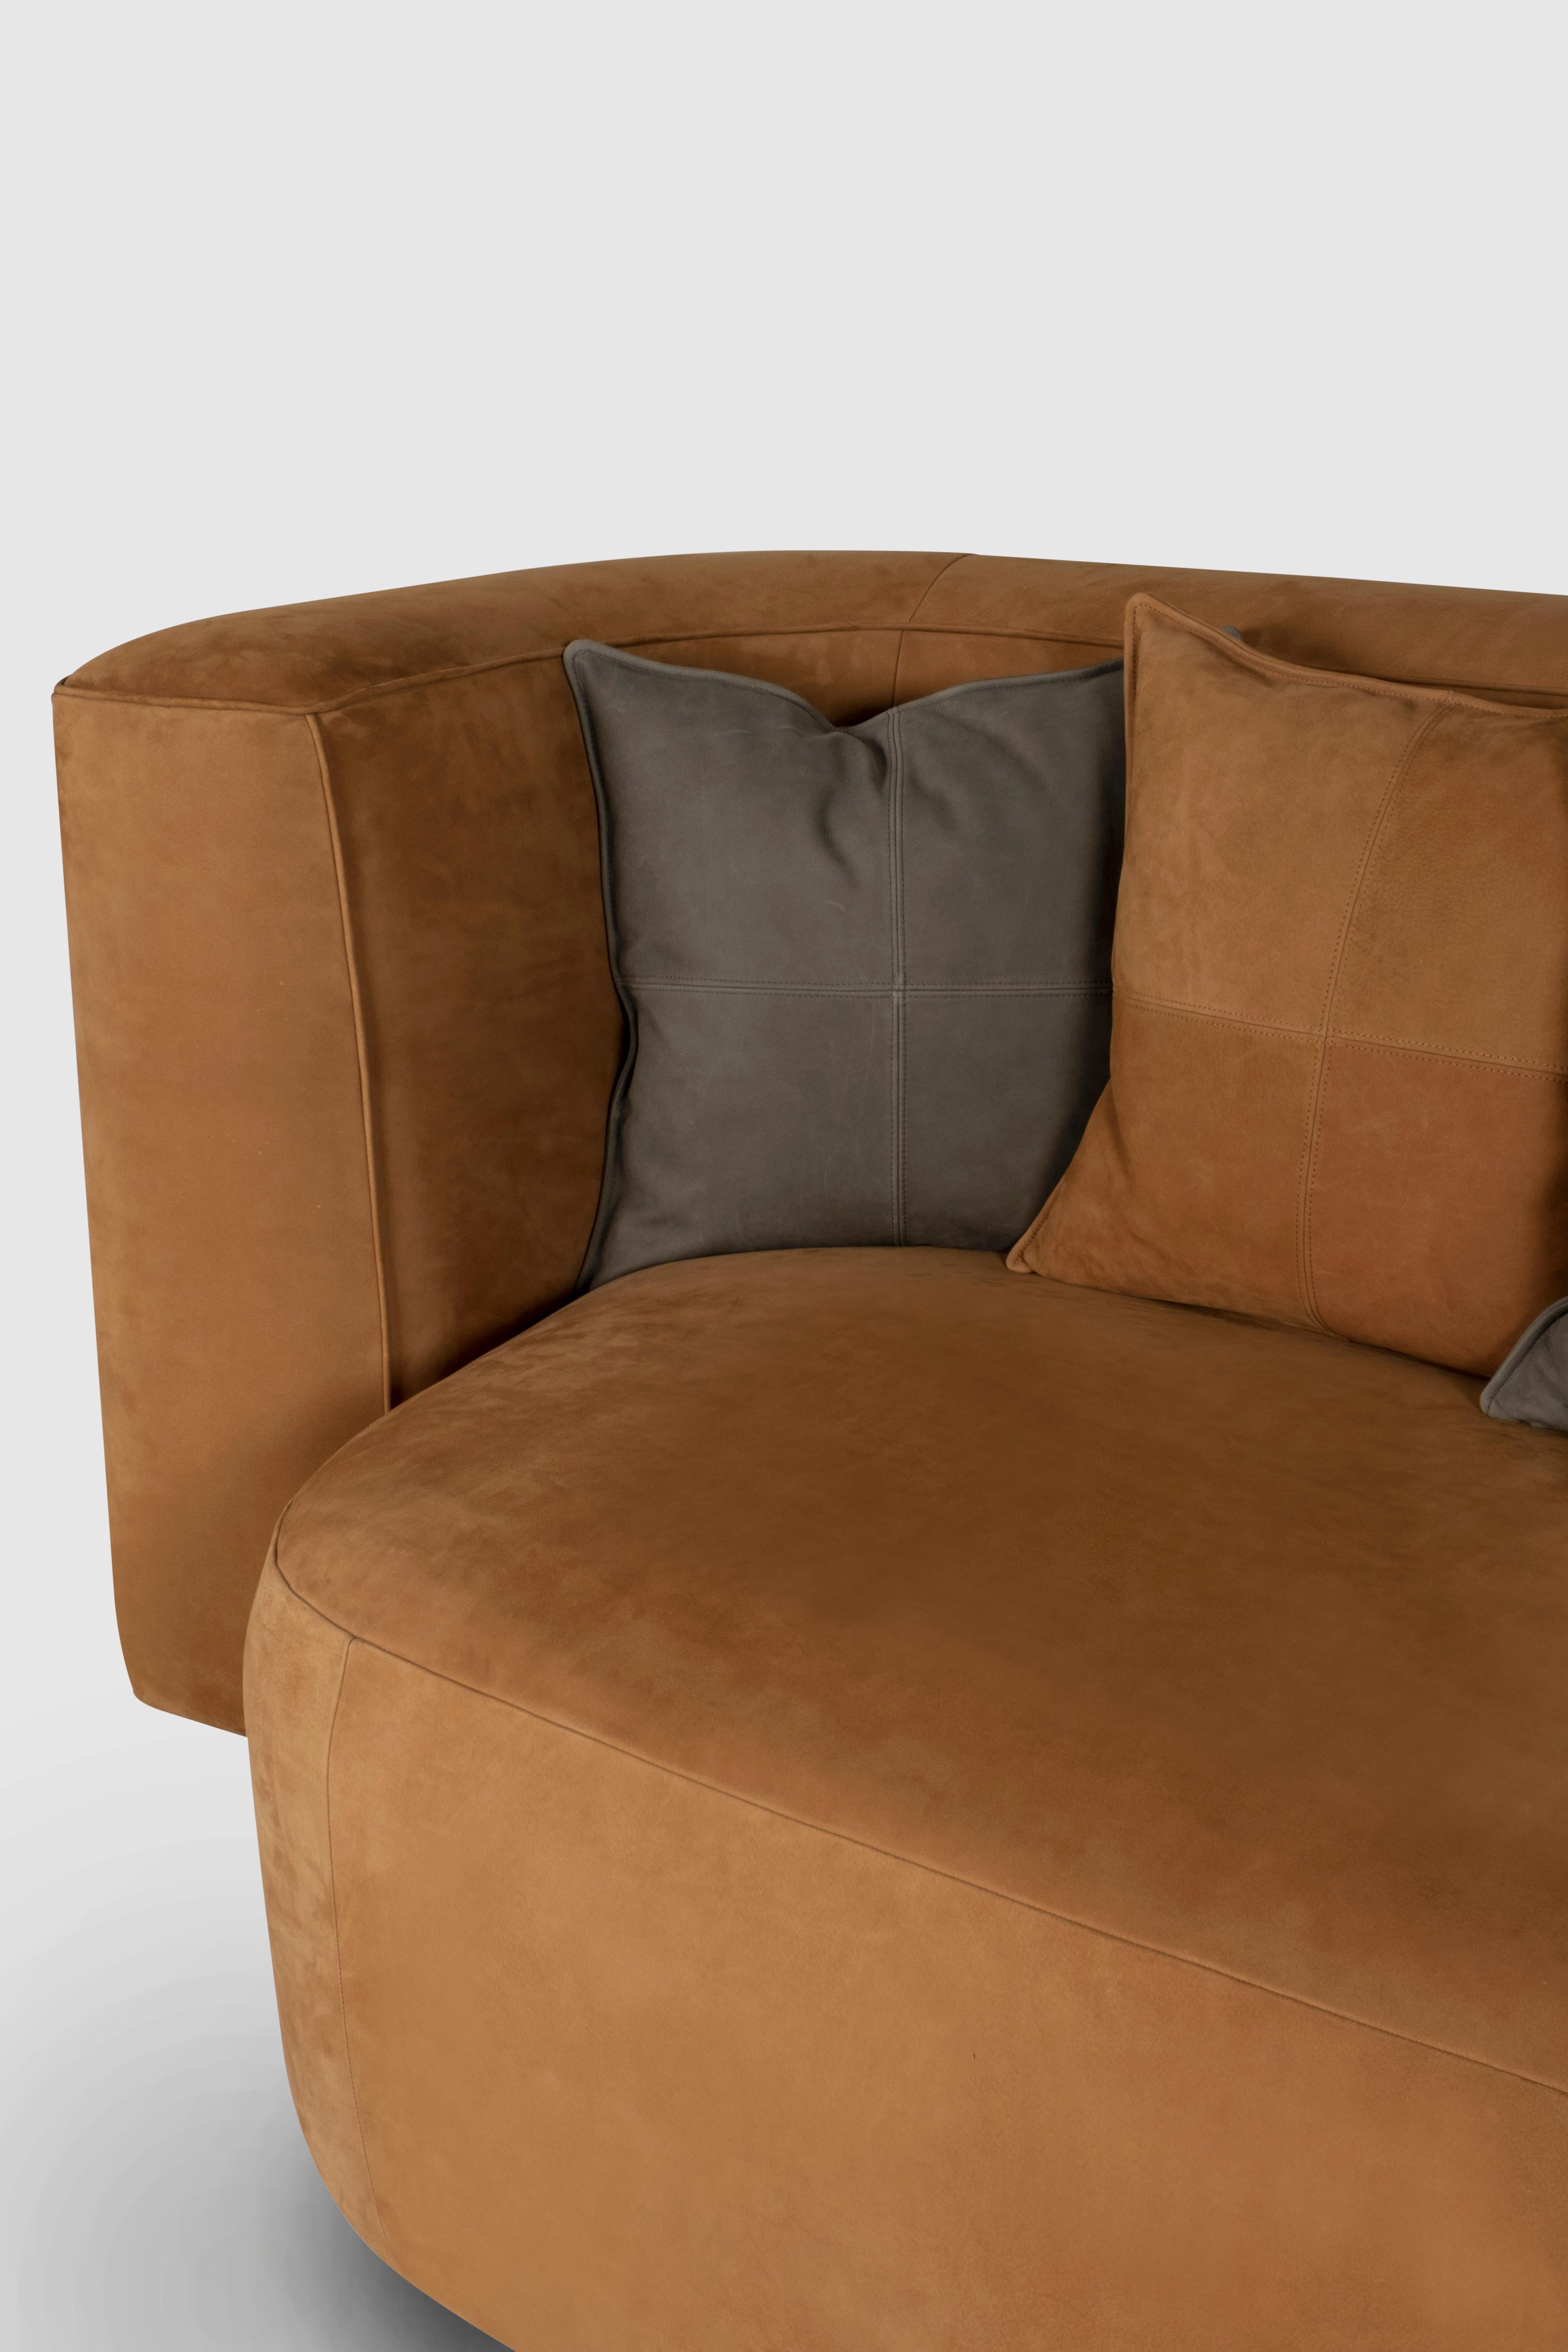 Marble Modern Galapinhos Sofa, Caramel Leather, Handmade in Portugal by Greenapple For Sale